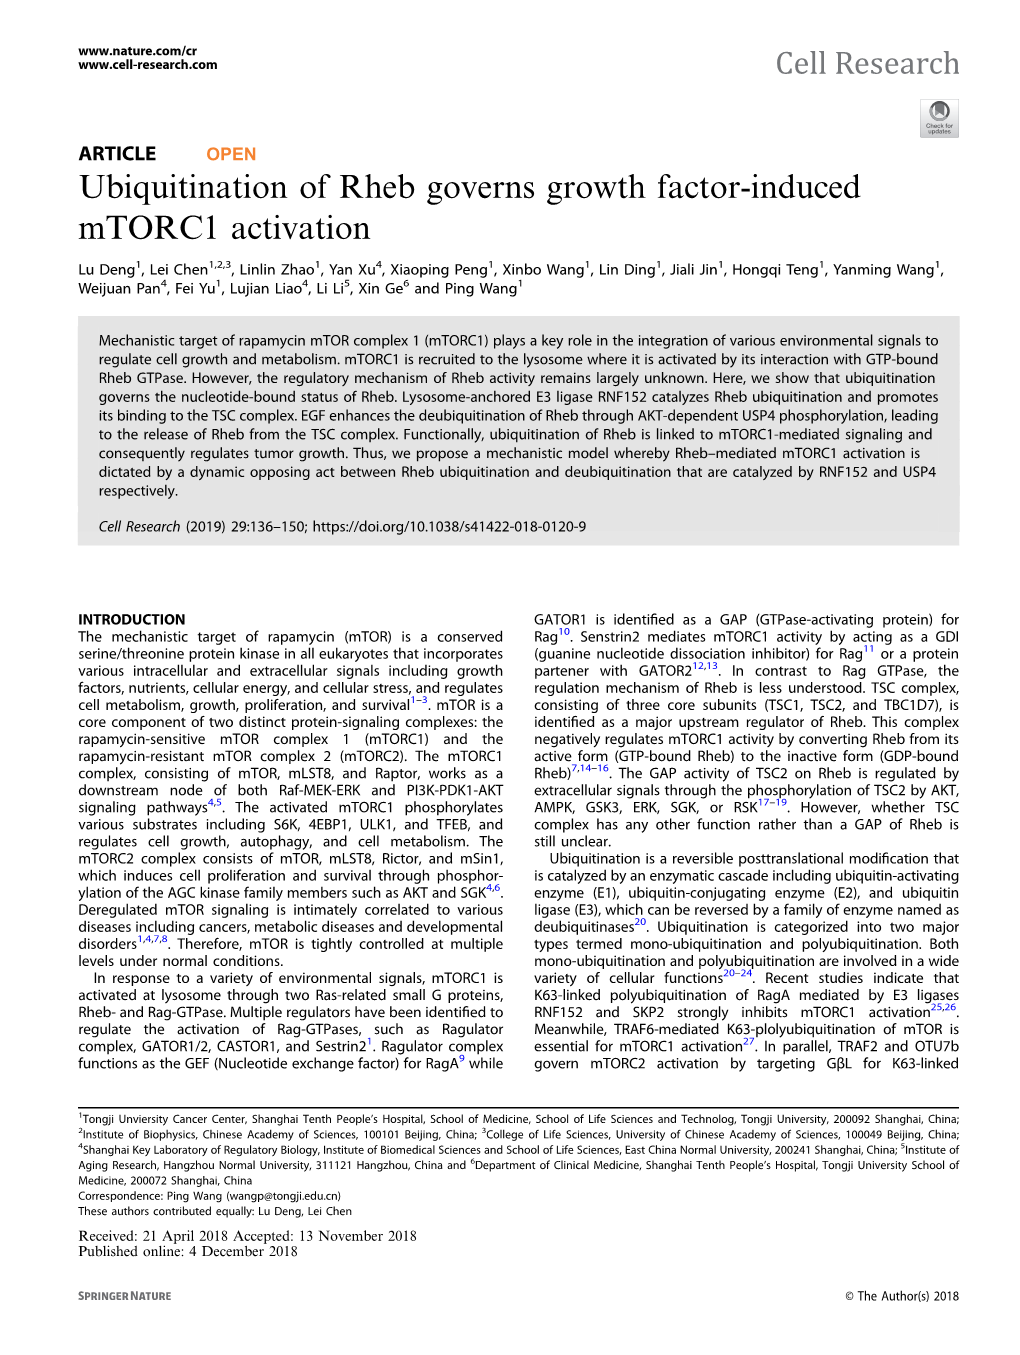 Ubiquitination of Rheb Governs Growth Factor-Induced Mtorc1 Activation